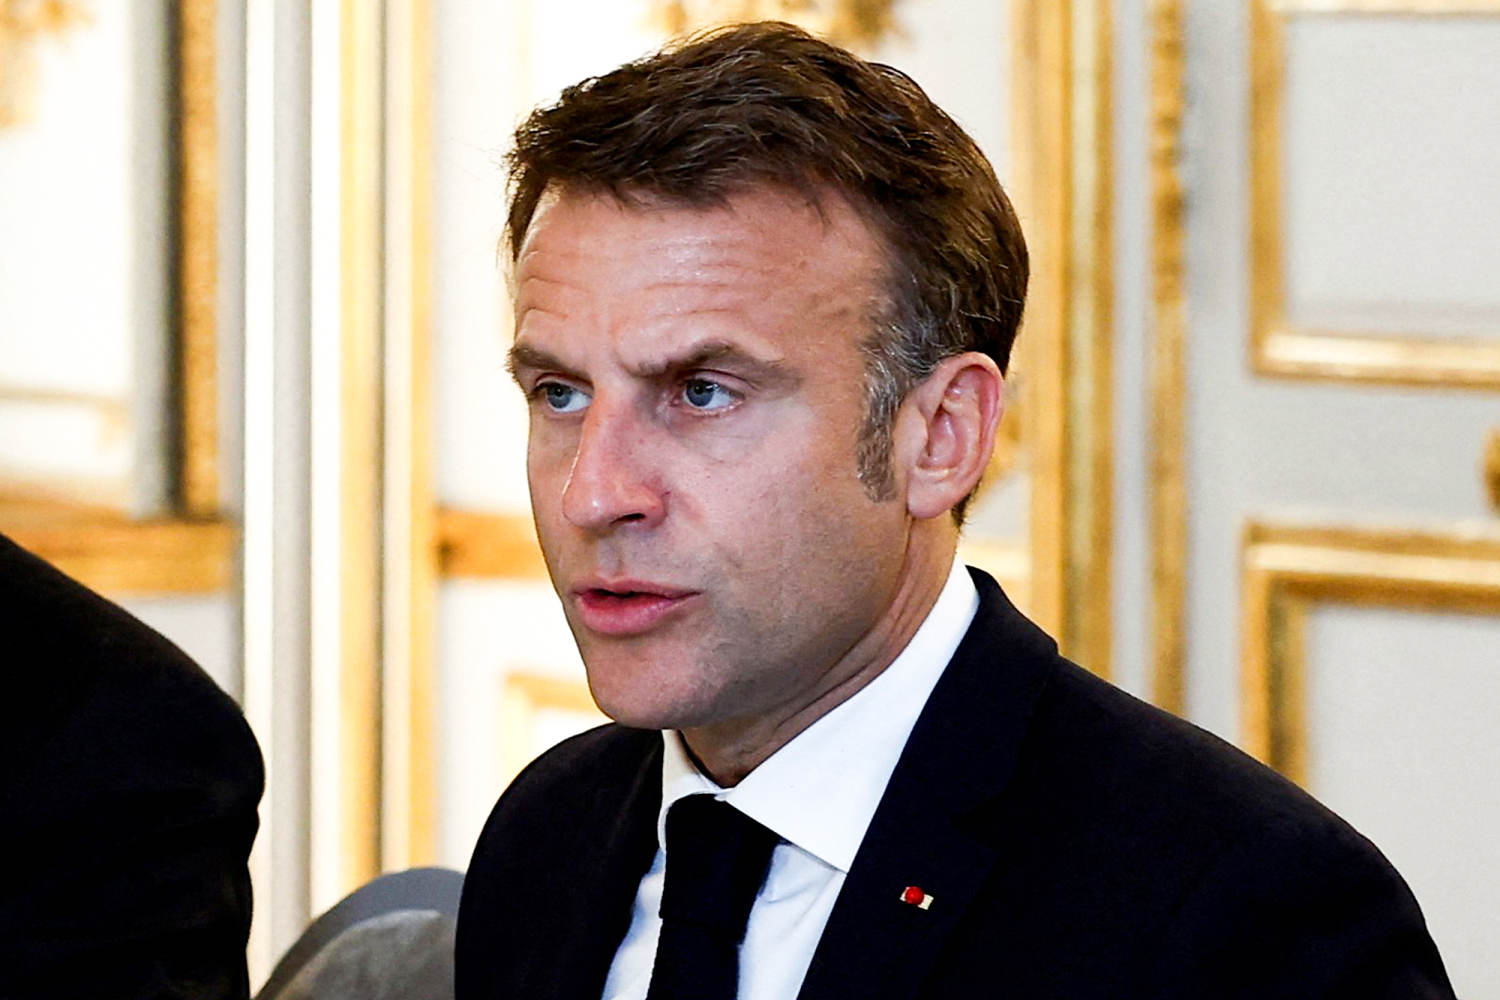 Emmanuel Macron making surprise trip to New Caledonia amid deadly unrest on French territory